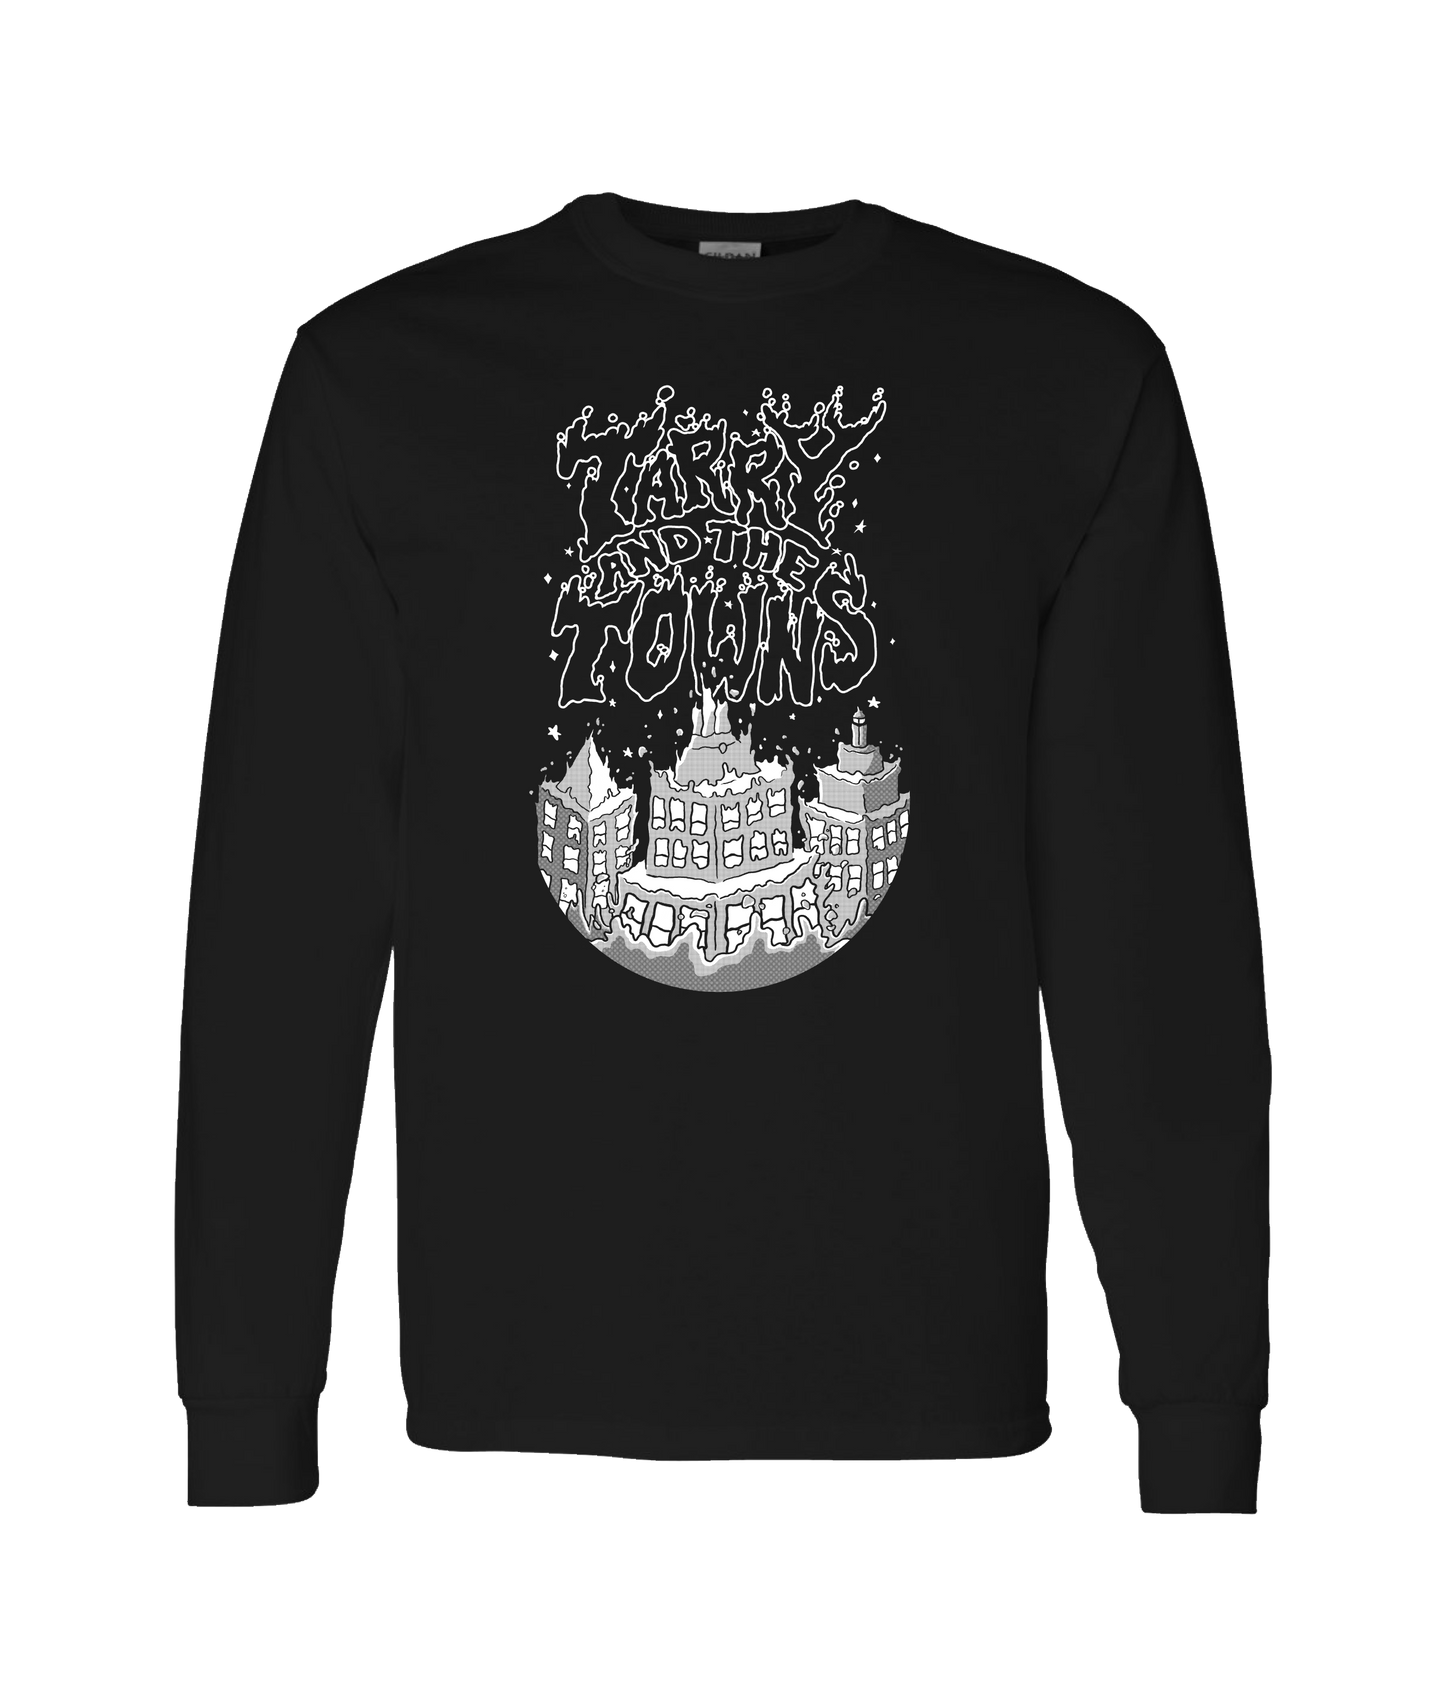 Tarry and the Towns - Inky - Black Long Sleeve T